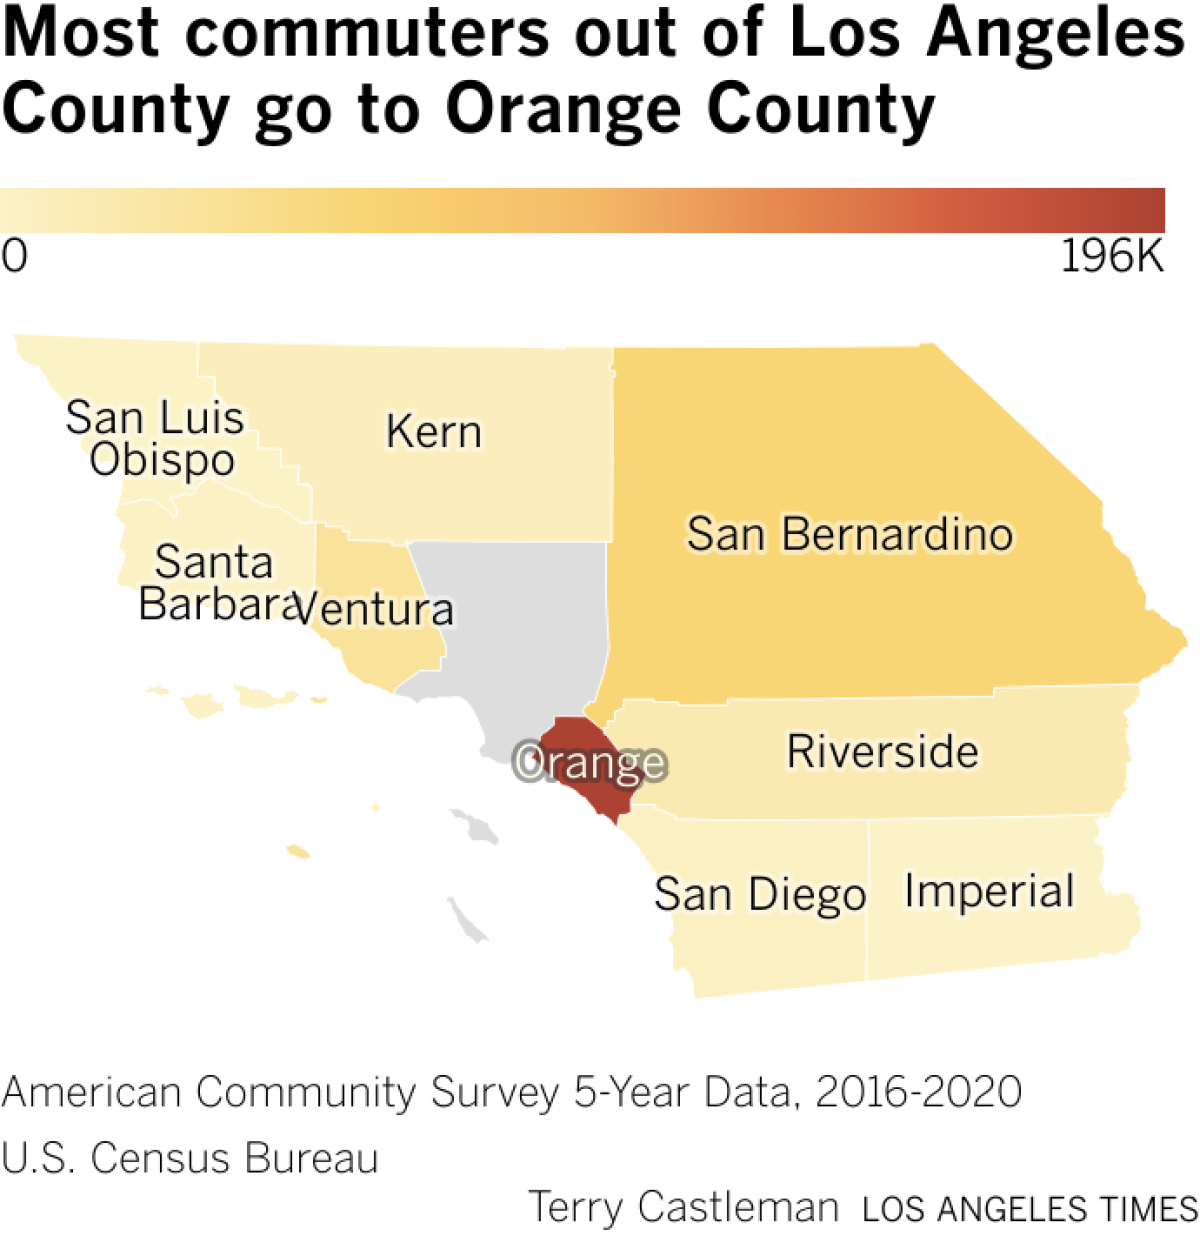 Map of Southern California counties showing that most daily commuters from Los Angeles County go to Orange County.